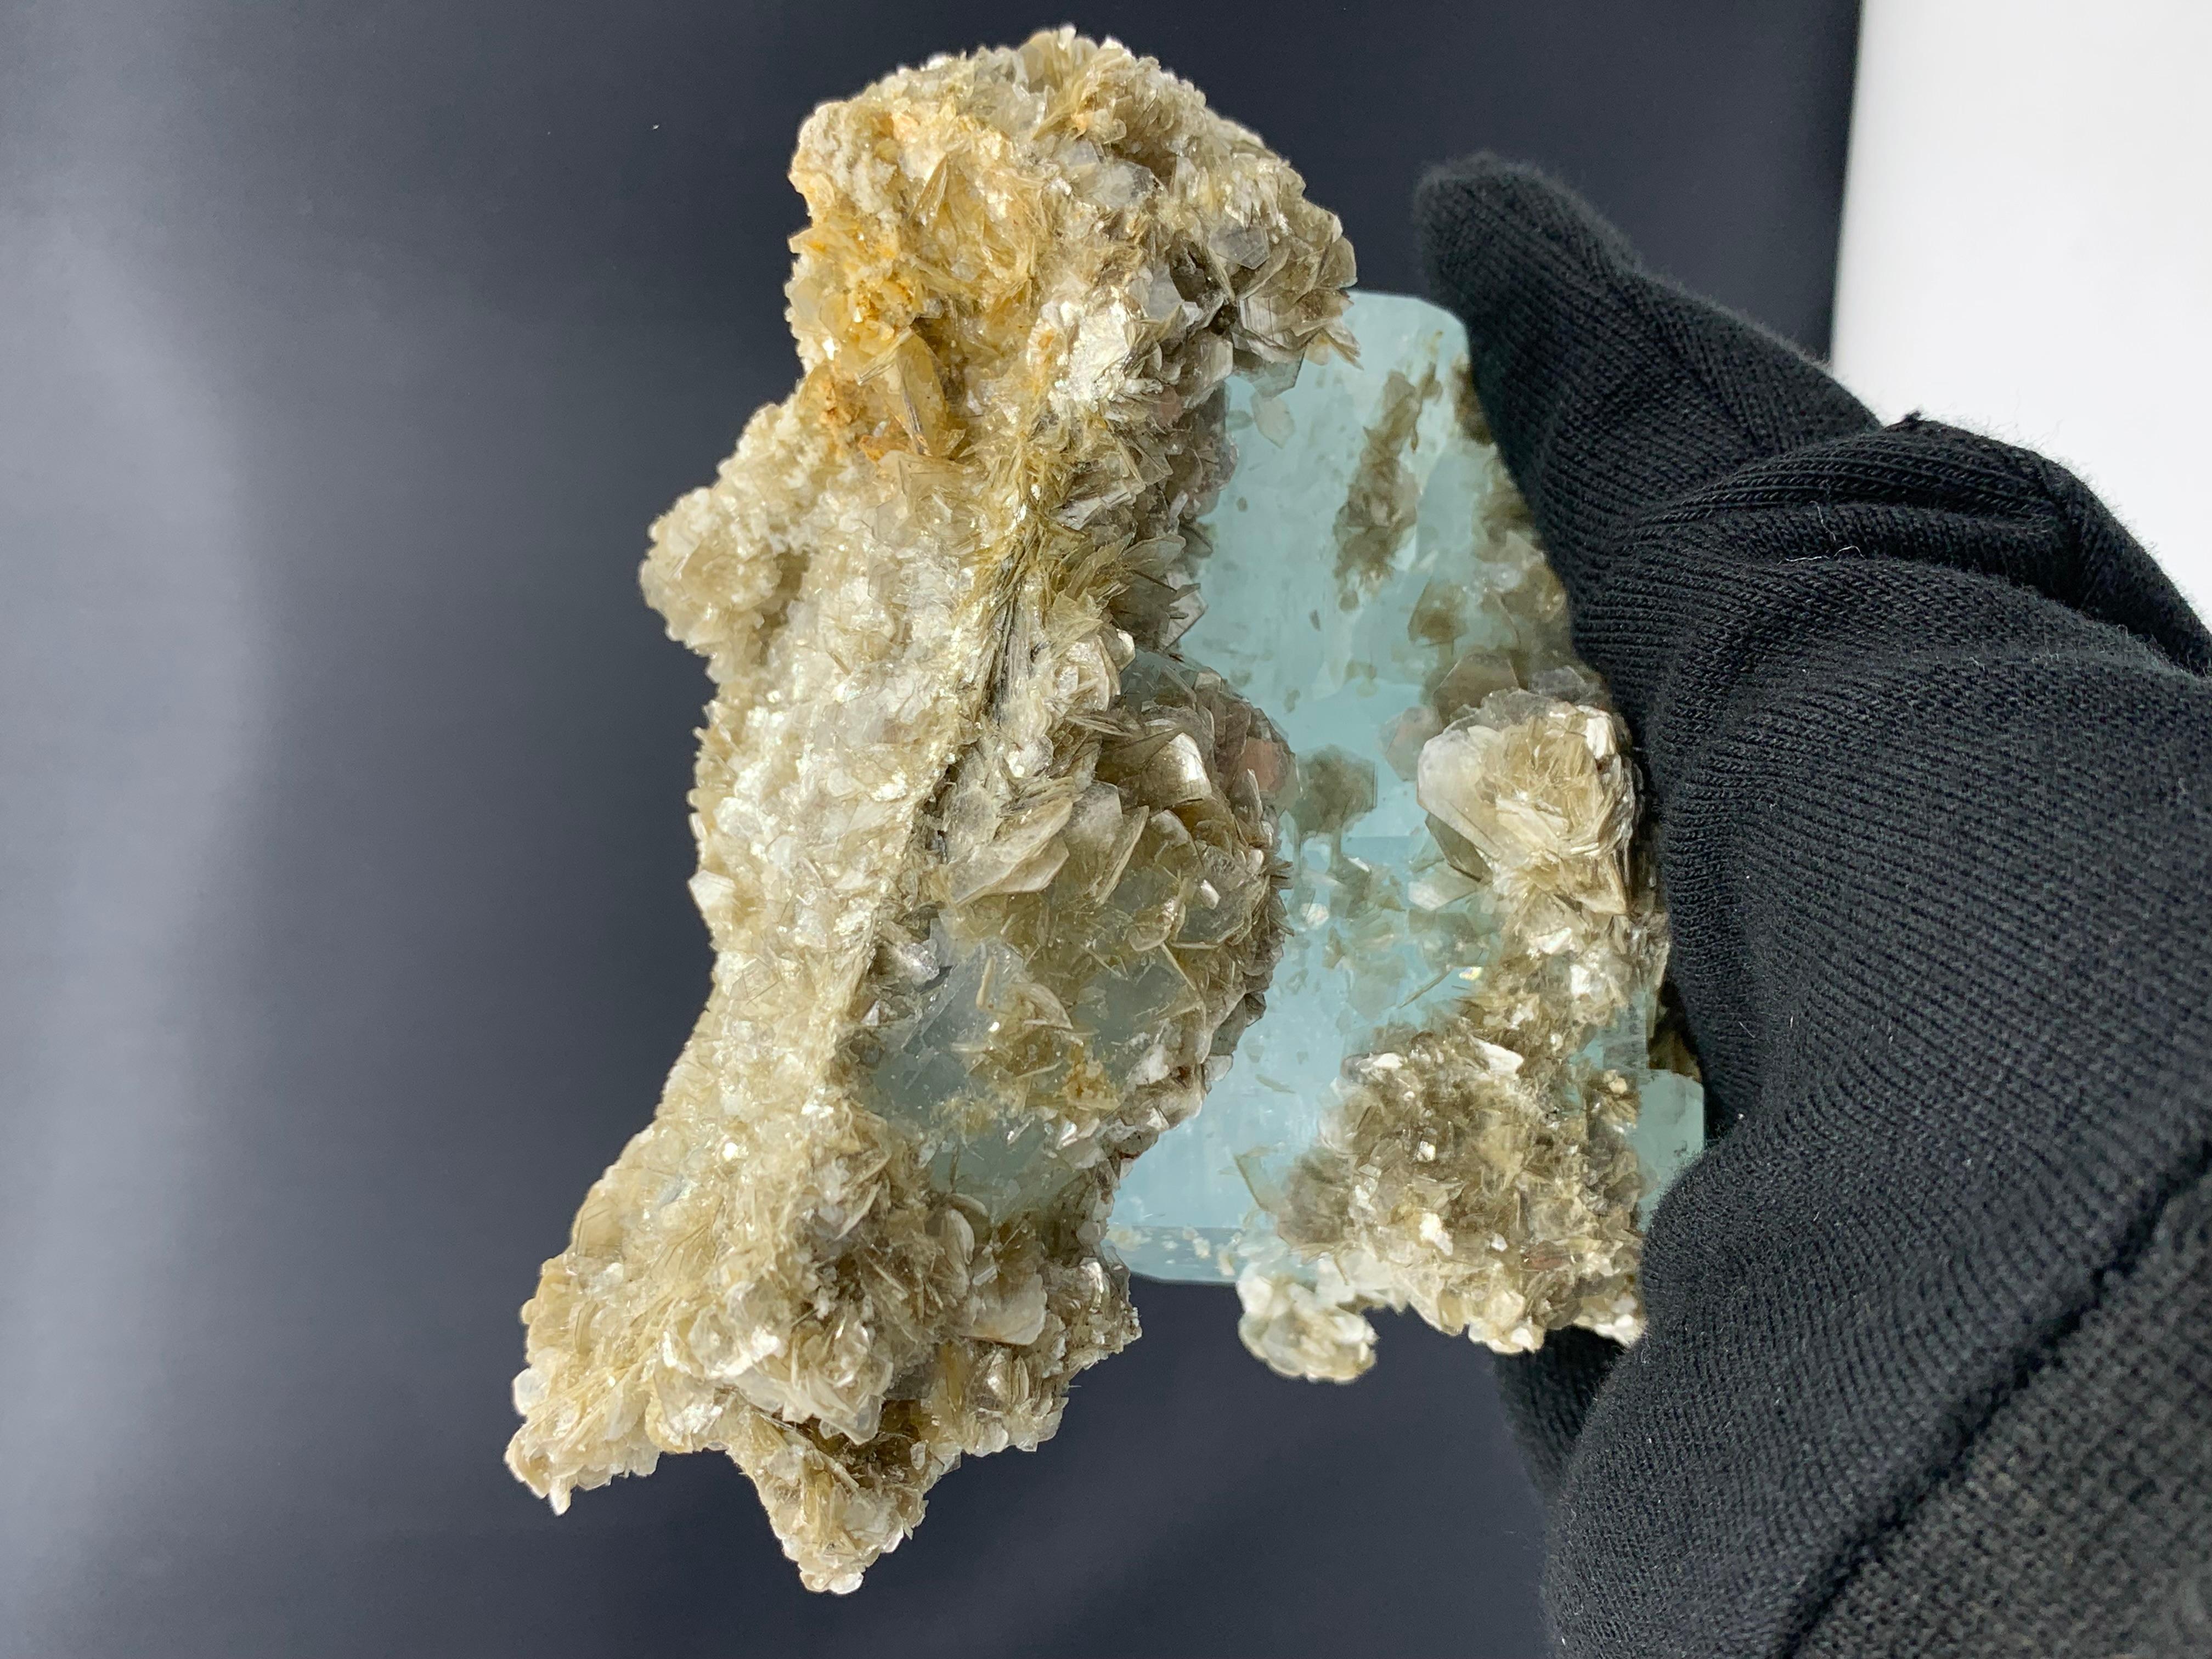 18th Century and Earlier 1048 Gram Marvellous Aquamarine Specimen With Muscovite From Nagar, Pakistan  For Sale